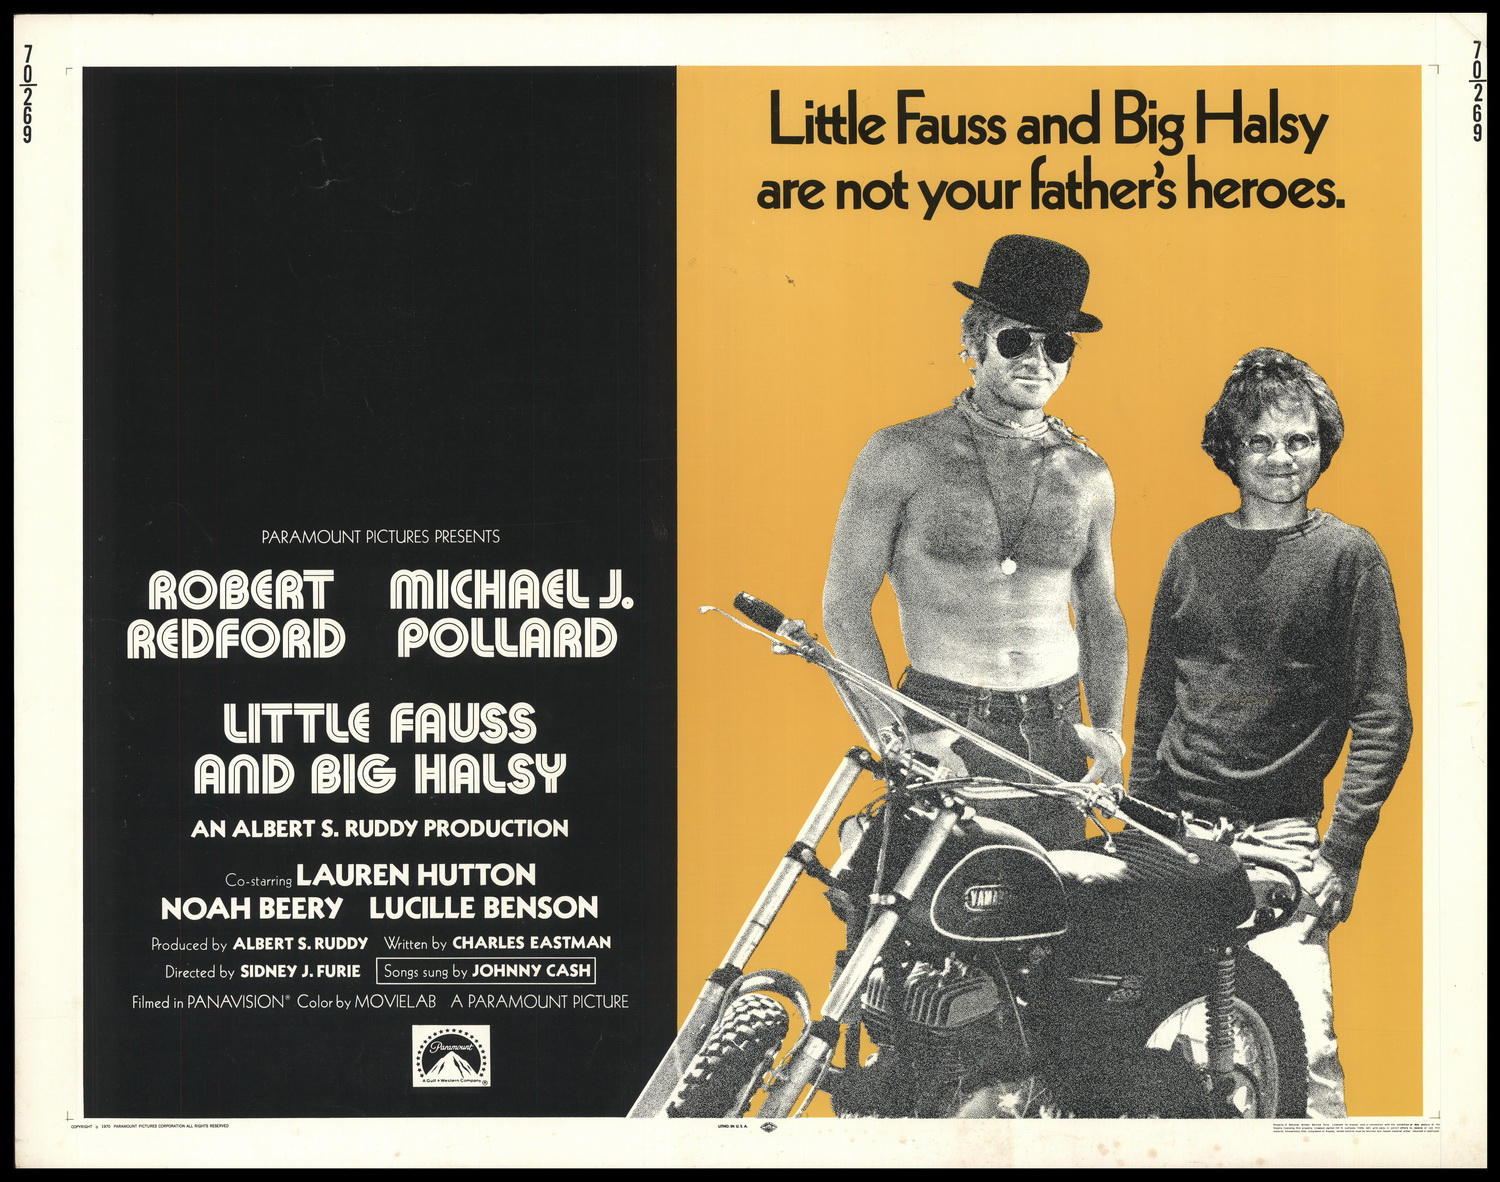 1970-Little Fauss Big Halsy-poster | Home Theater Forum